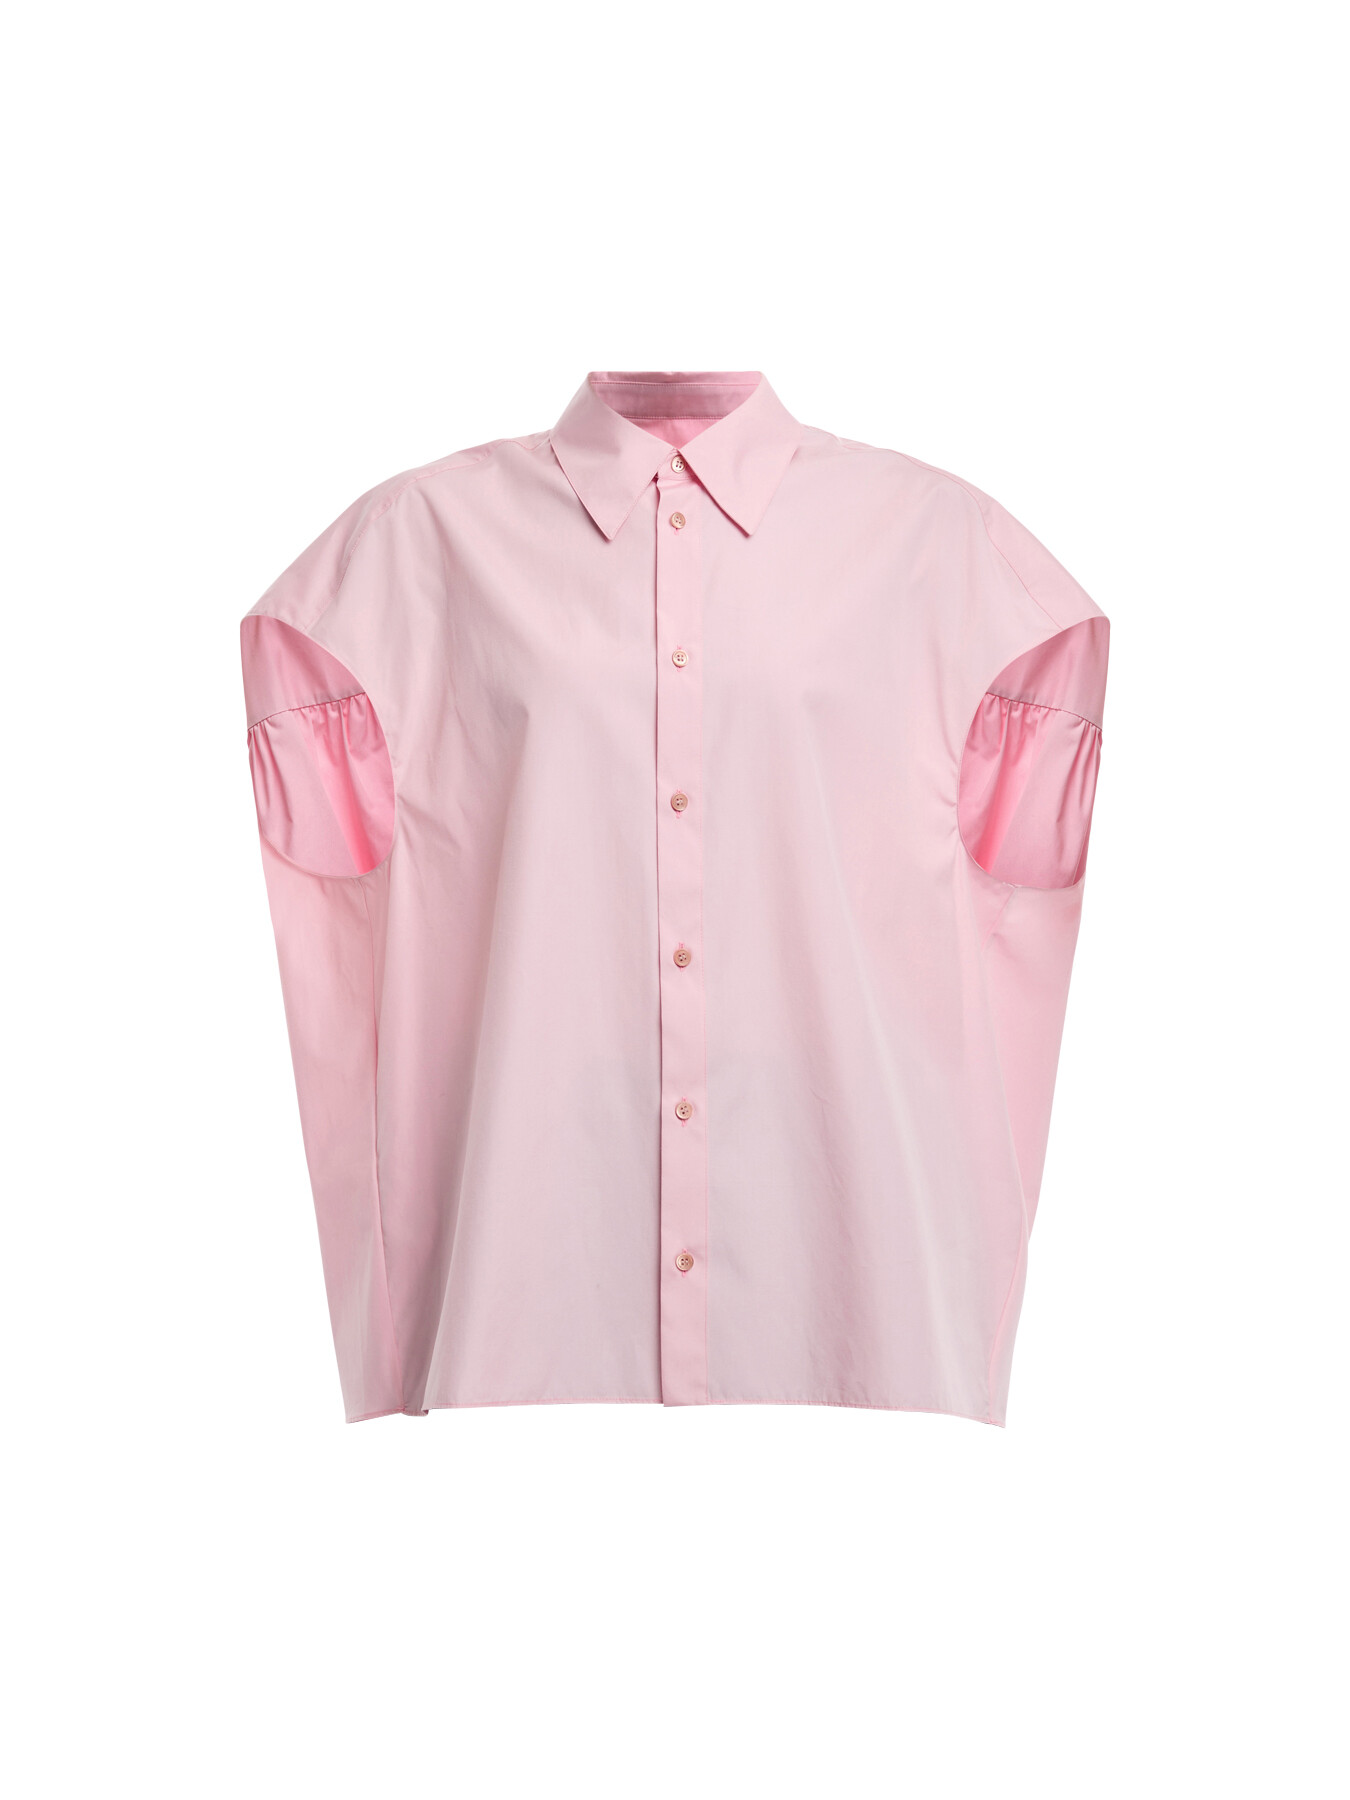 Marni Women's Cocoon Sleeveless Shirt With Collar In Pink